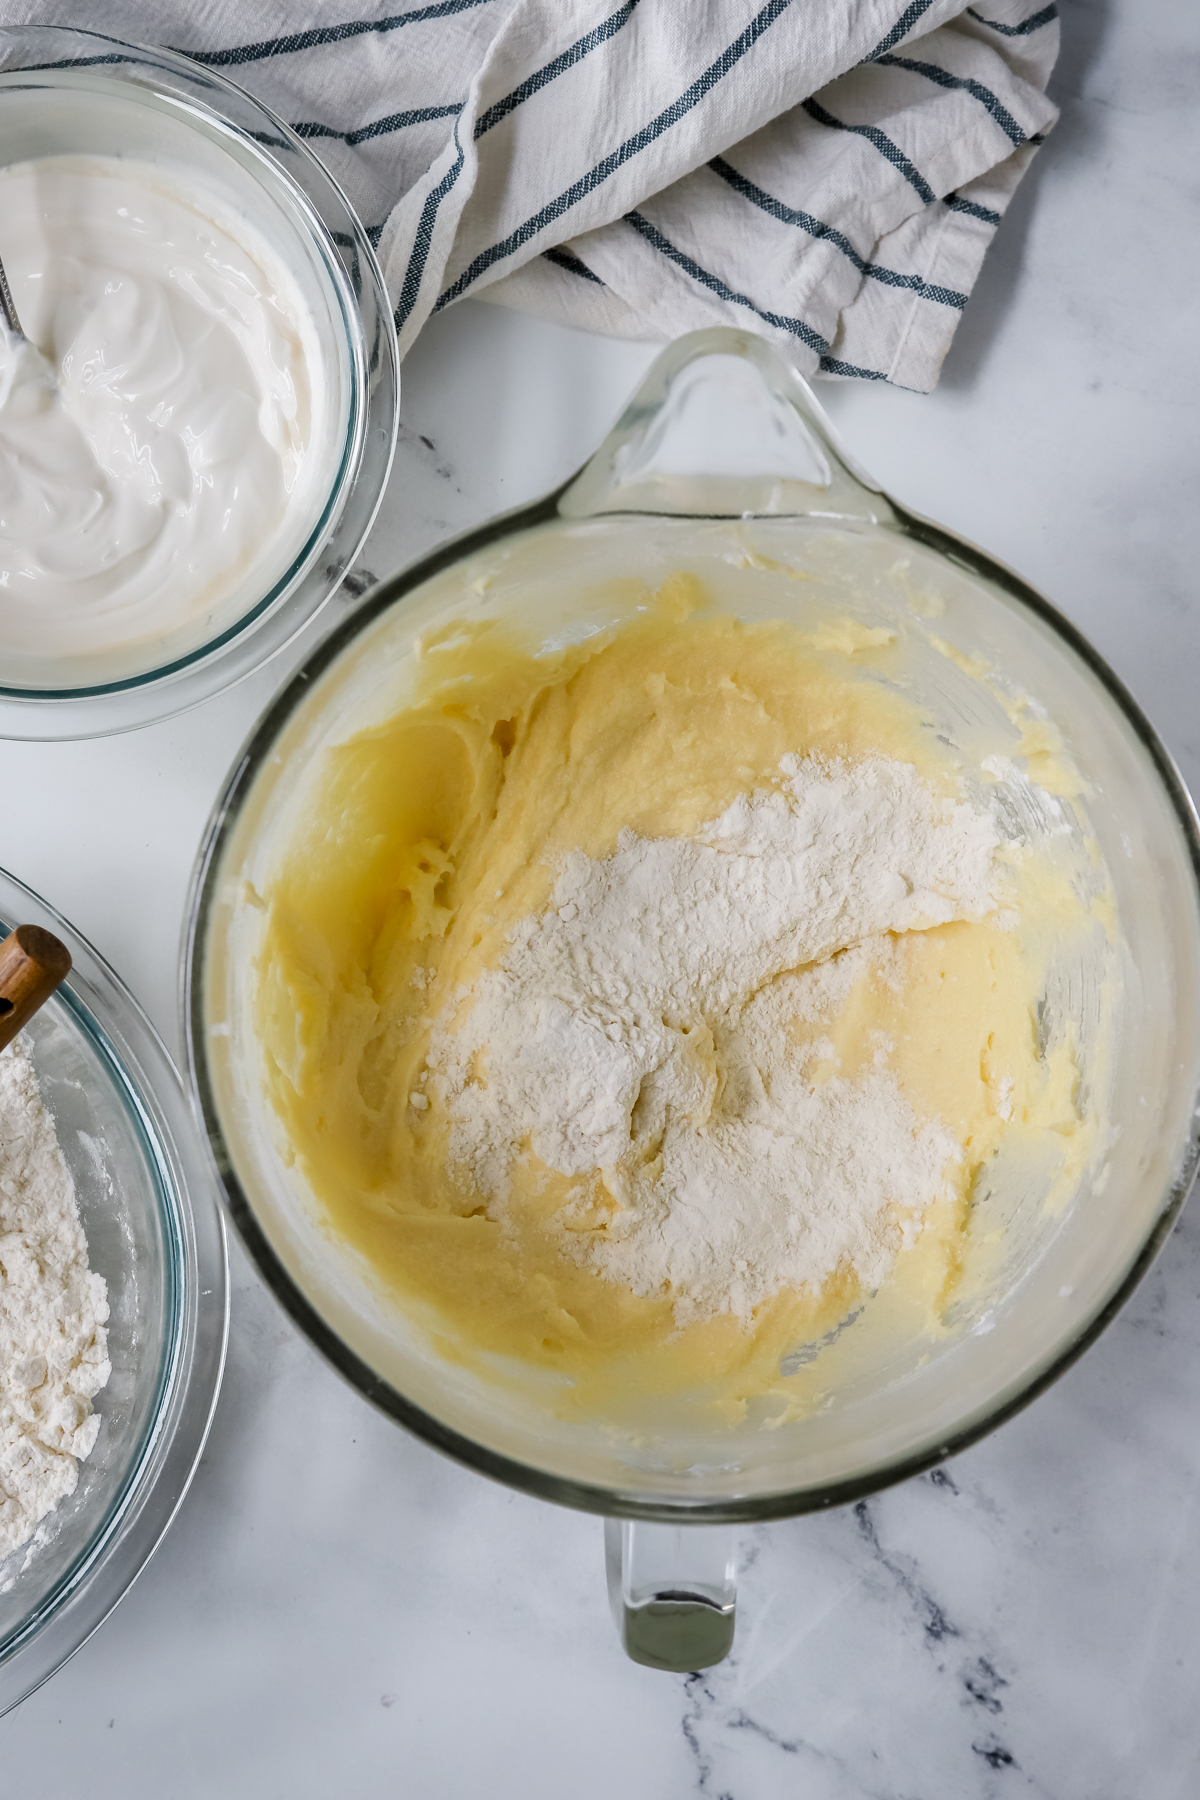 flour mixture added to pound cake batter